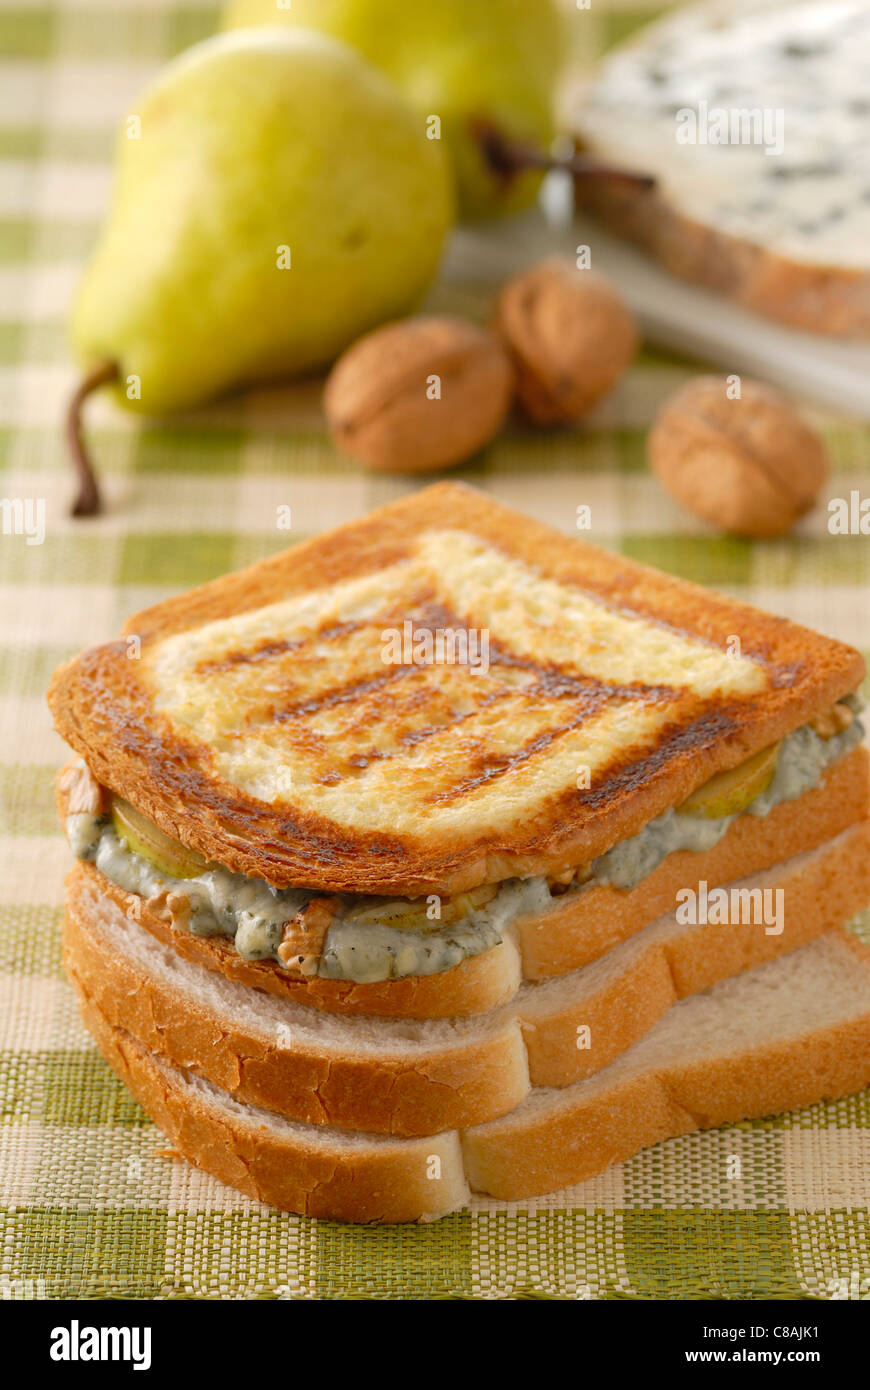 Fourme d'Ambert,pear and walnut toasted sandwich Stock Photo